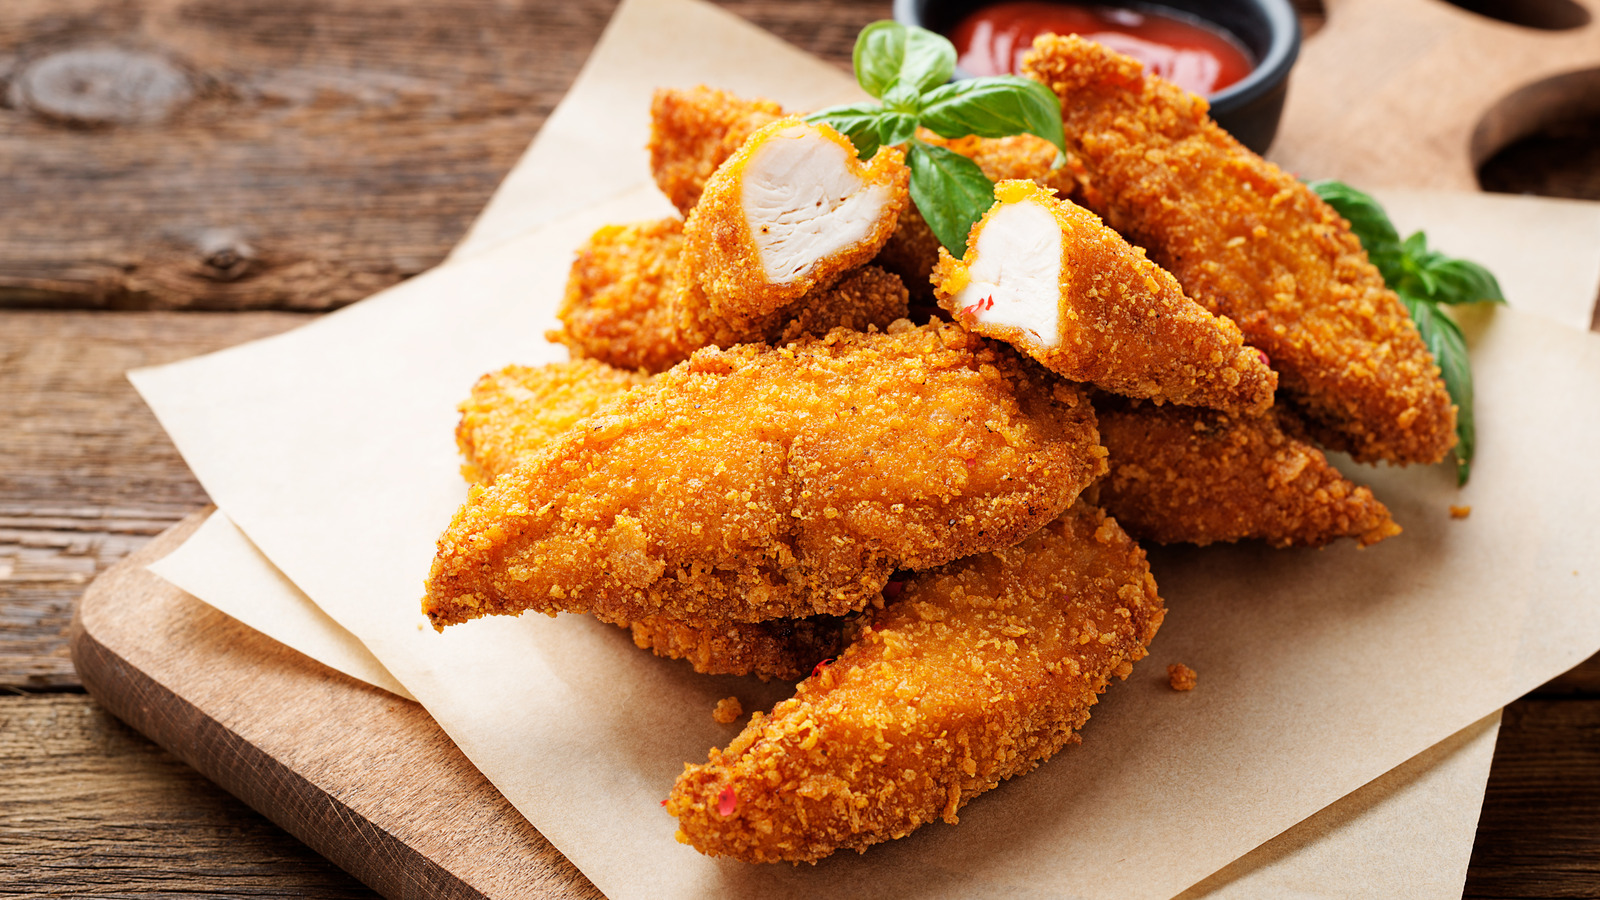 Real Good Foods launches high-protein, low-carb breaded chicken